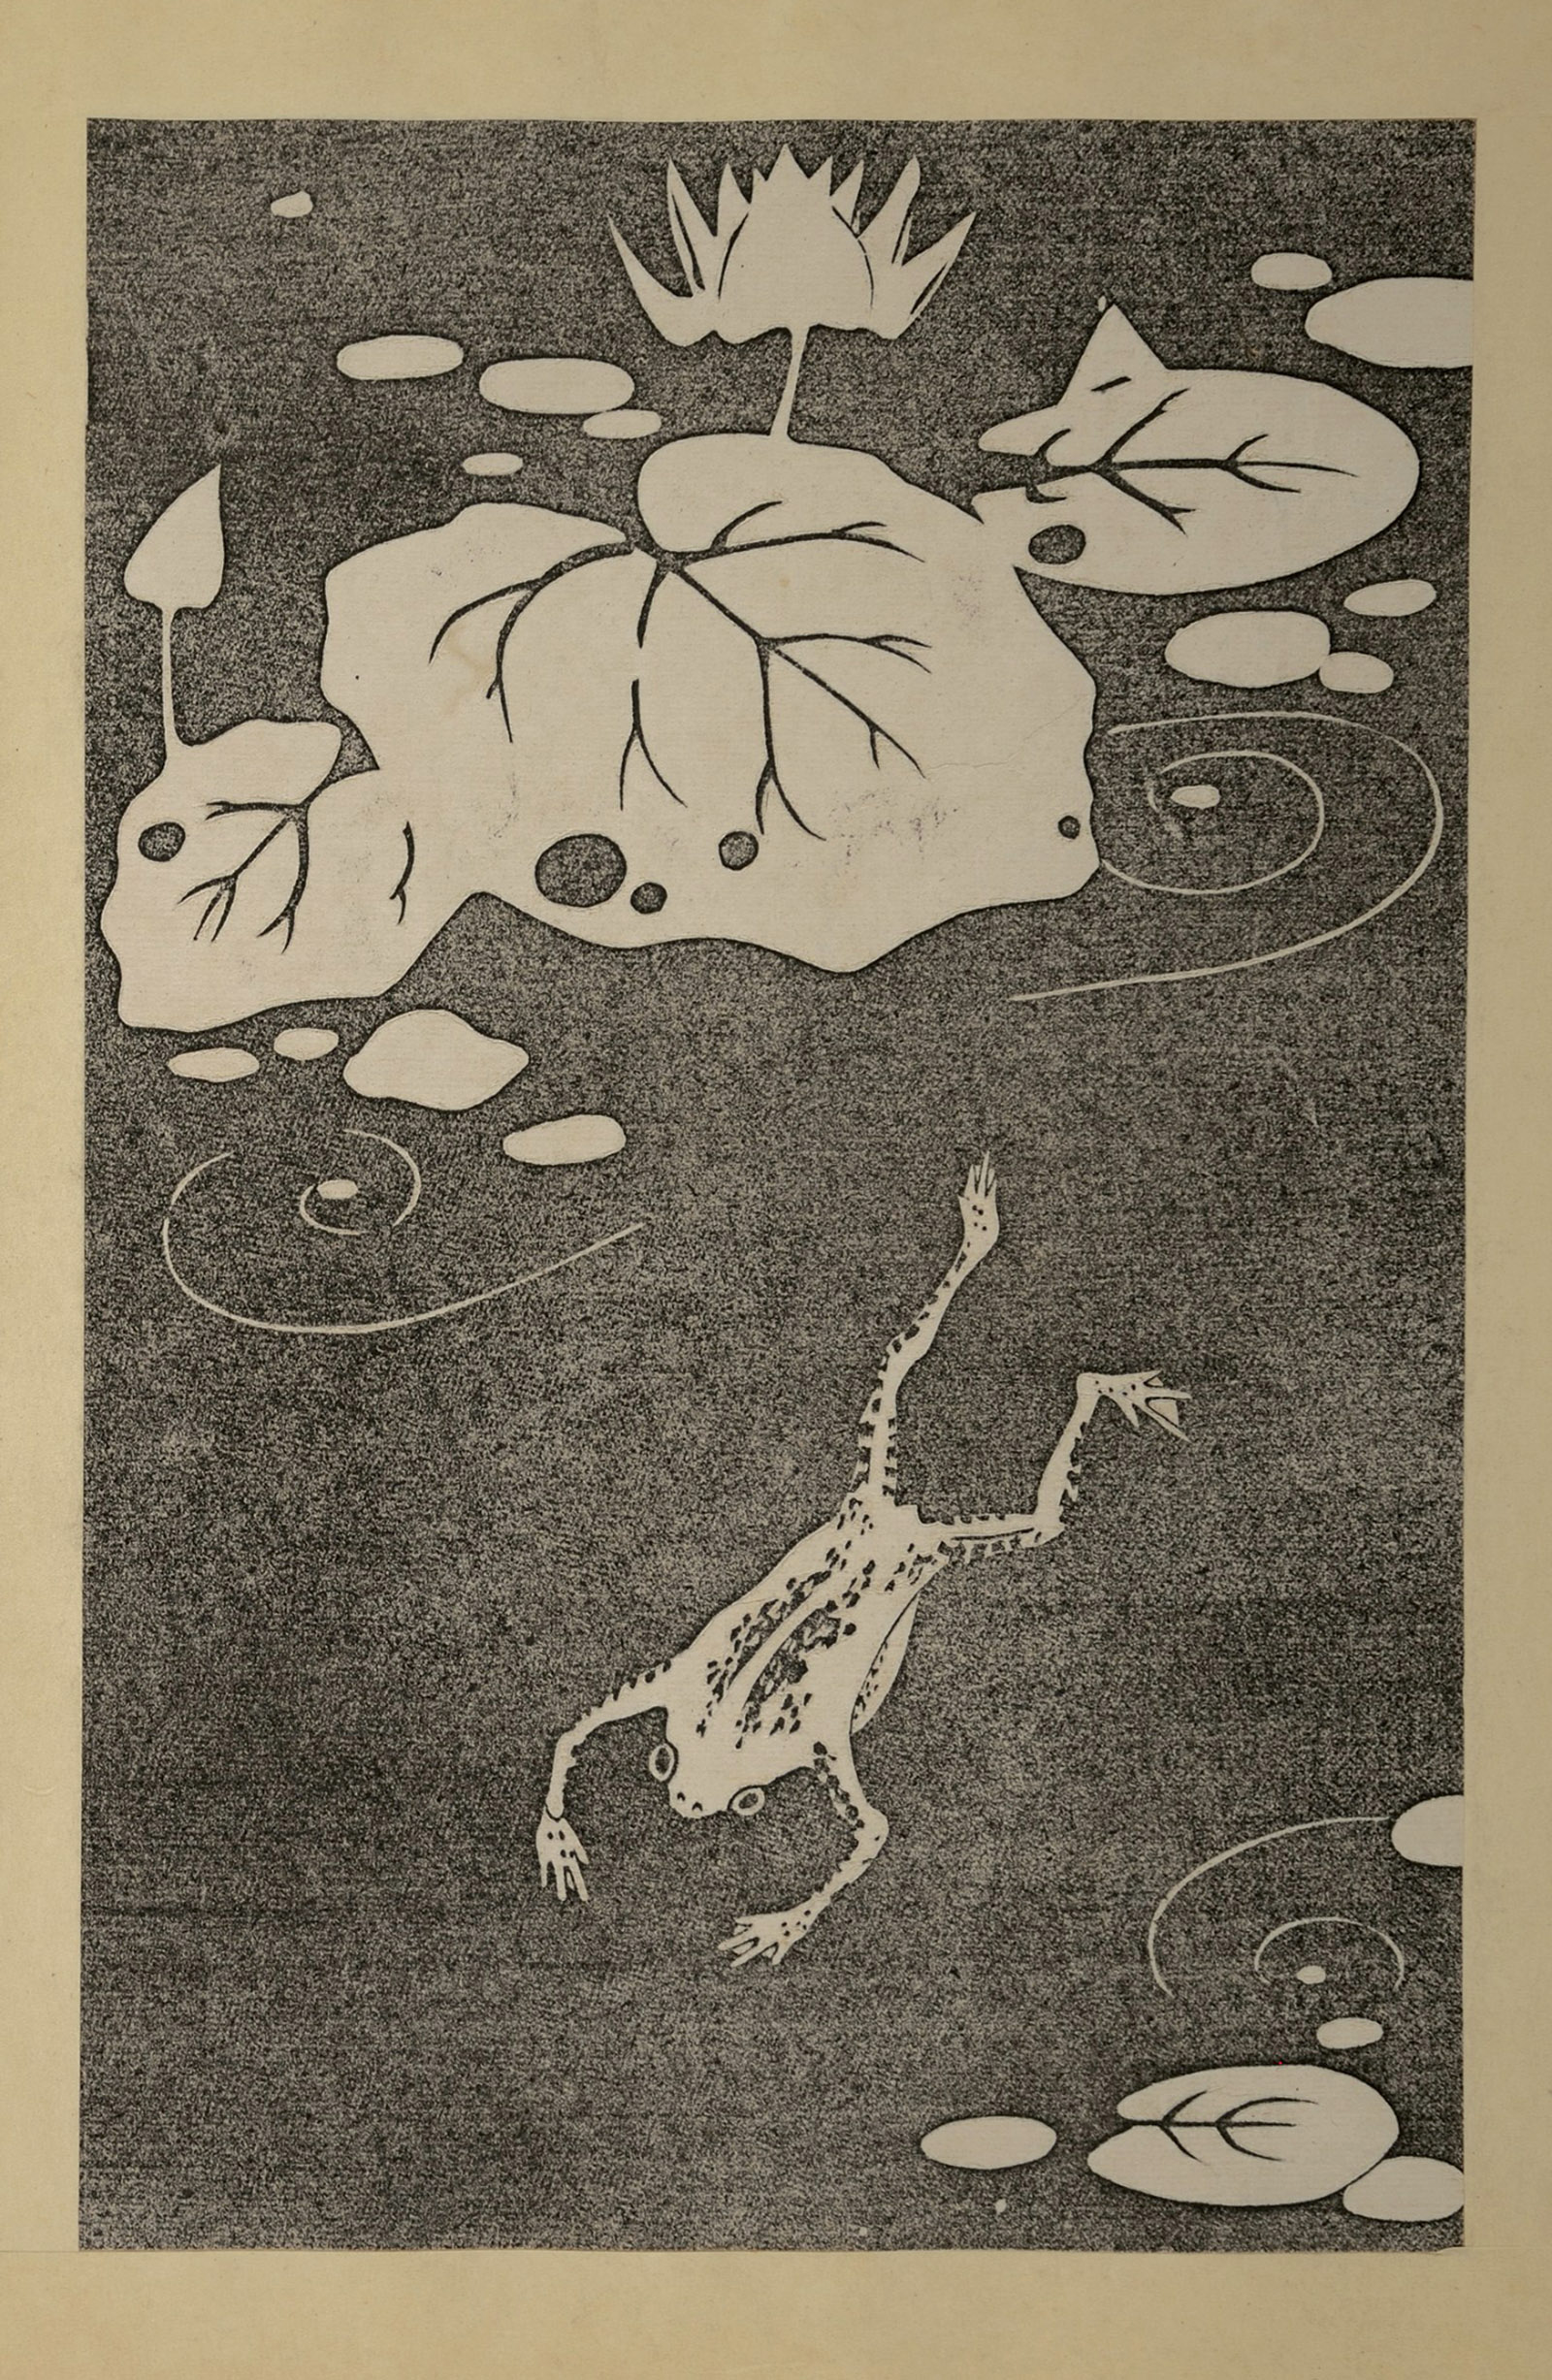 Woodblock by Itō Jakuchū of a frog and lily pads